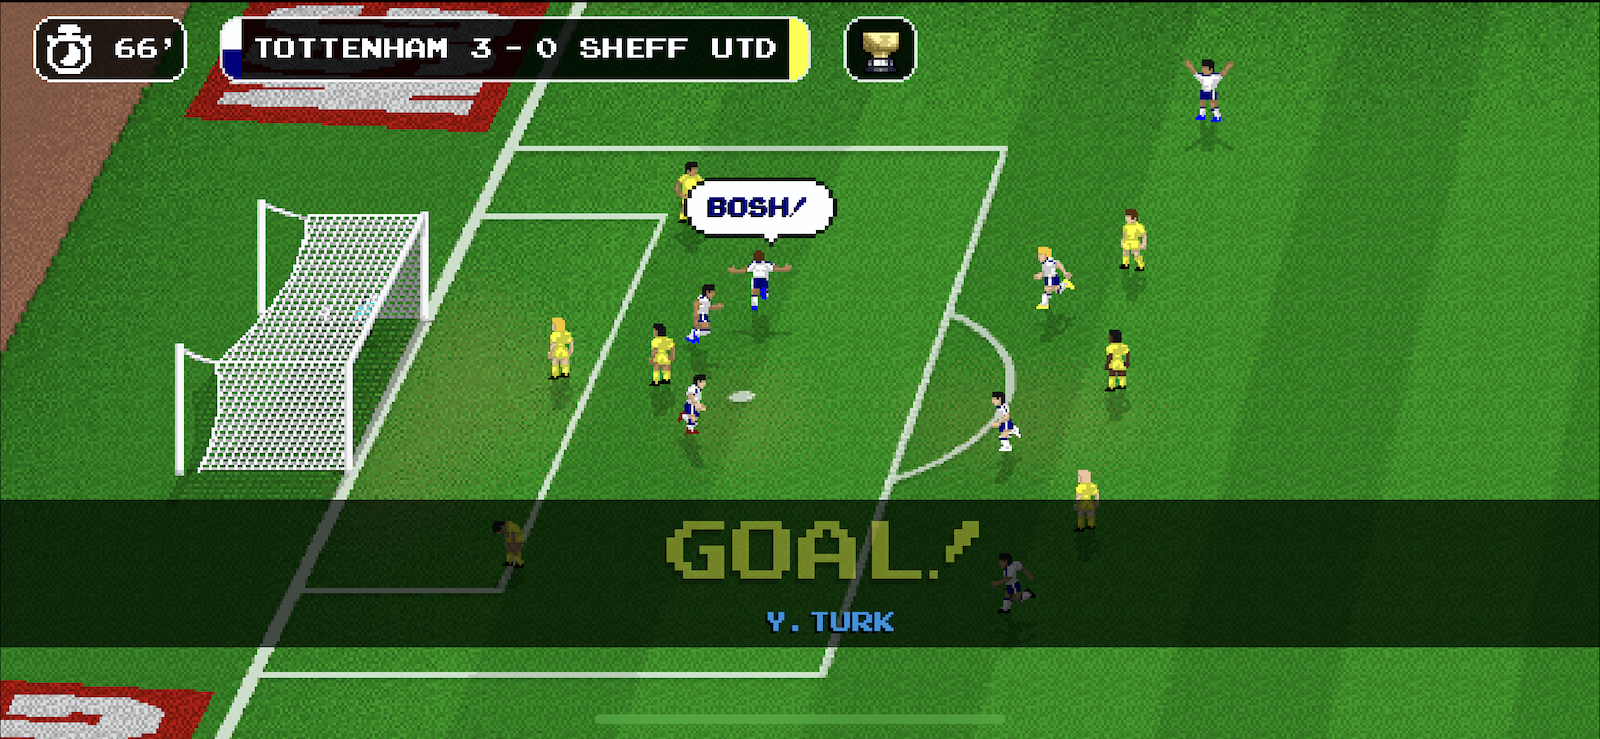 This Little Soccer Game On My Phone Is Fun As Hell